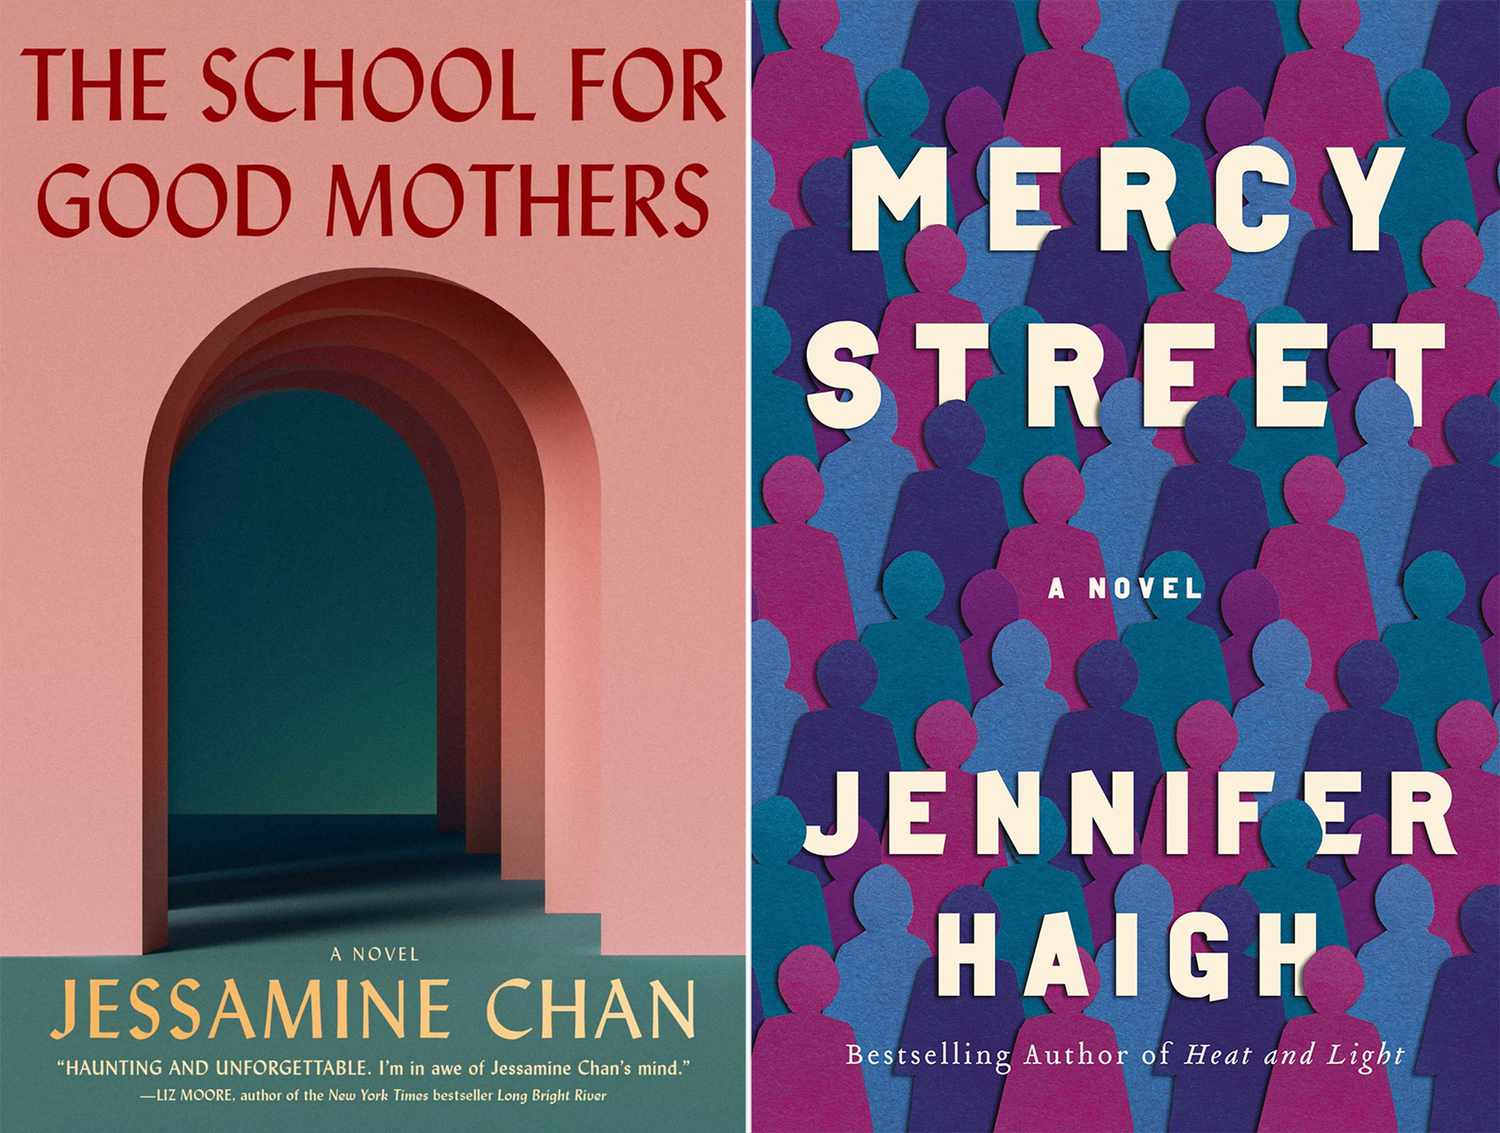 The School for Good Mothers, MERCY STREET